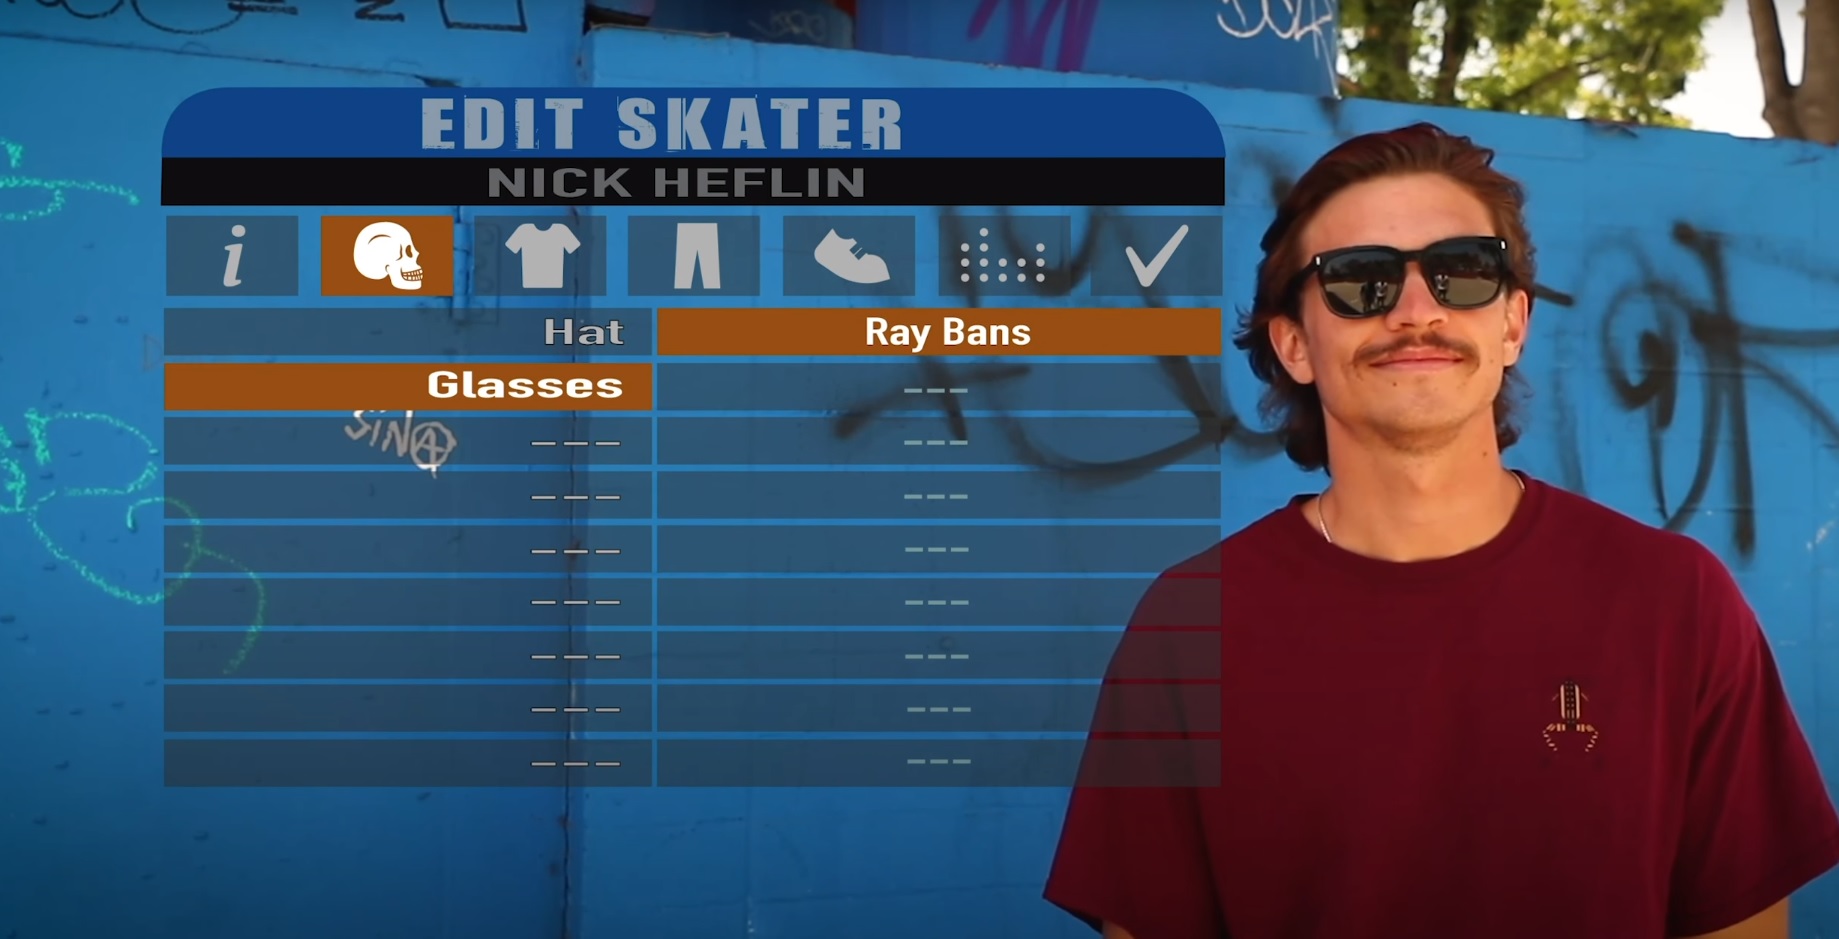 A screengrab from a YouTube video imitating a Tony Hawk video game